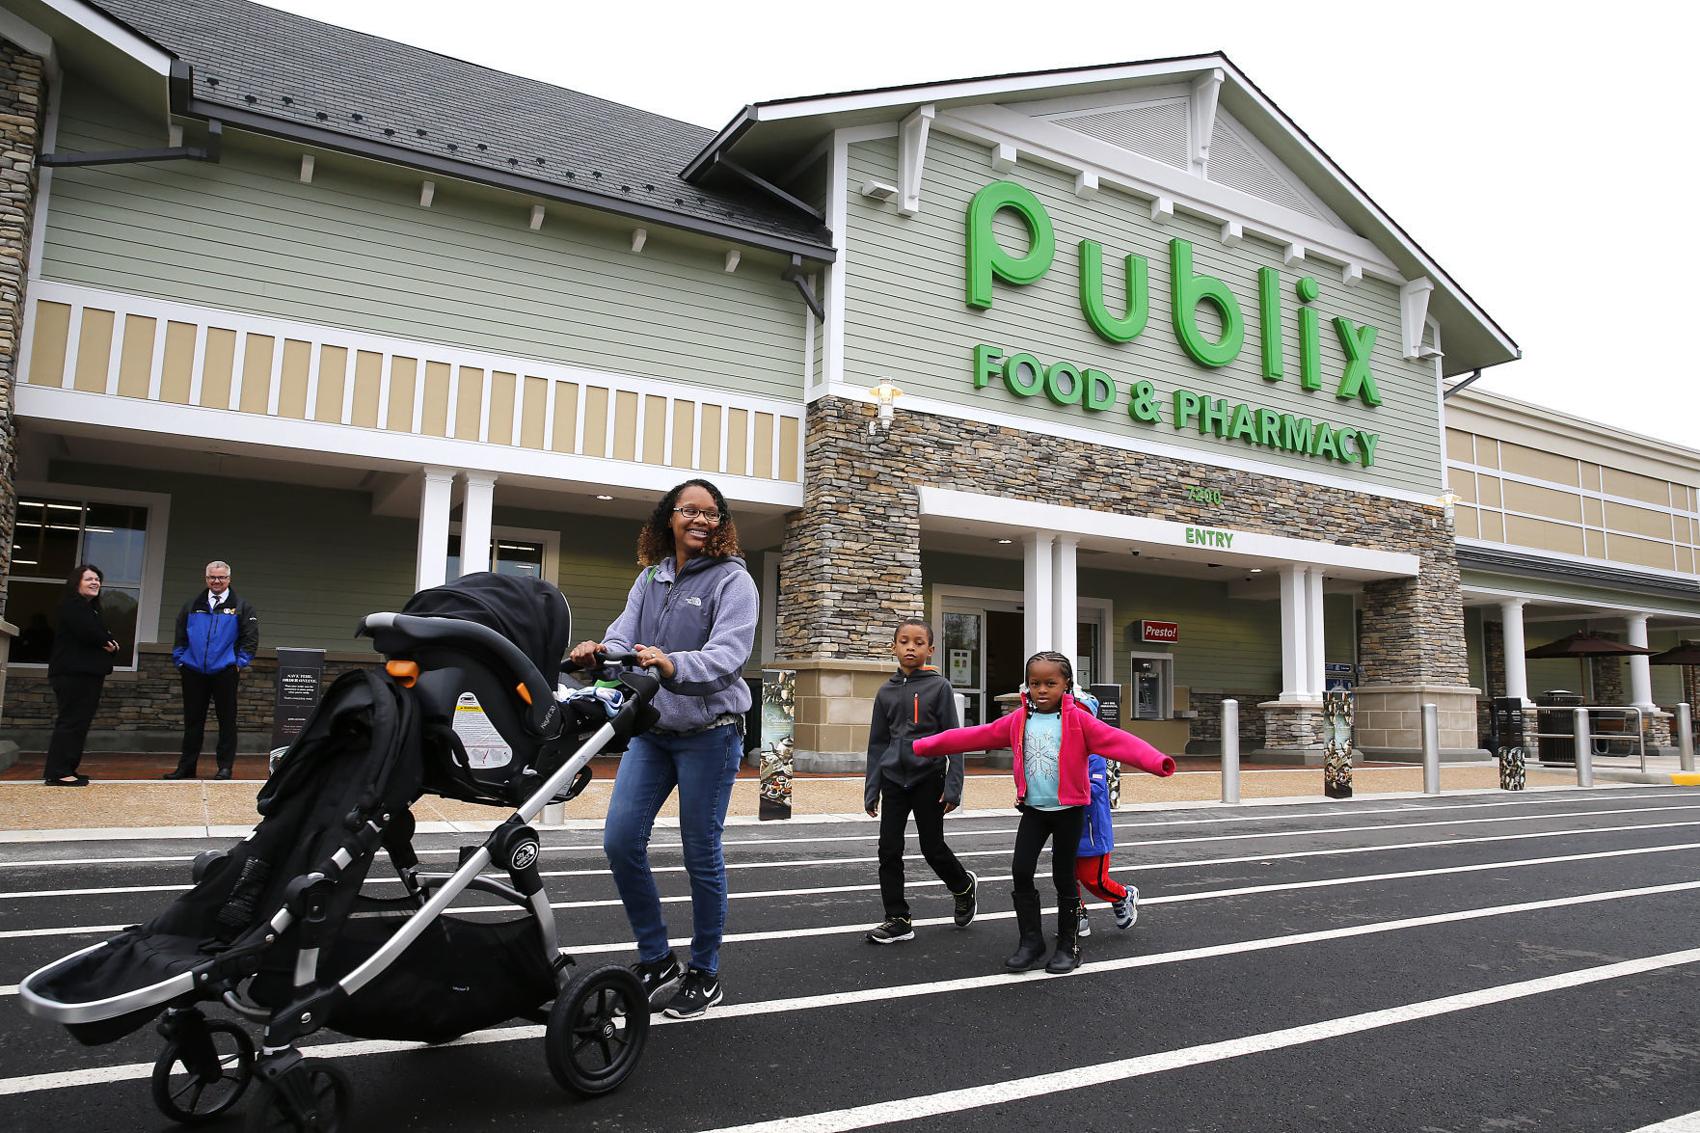 Mother pushing a stroller with kids behind her, leaving a Publix food and pharmacy store